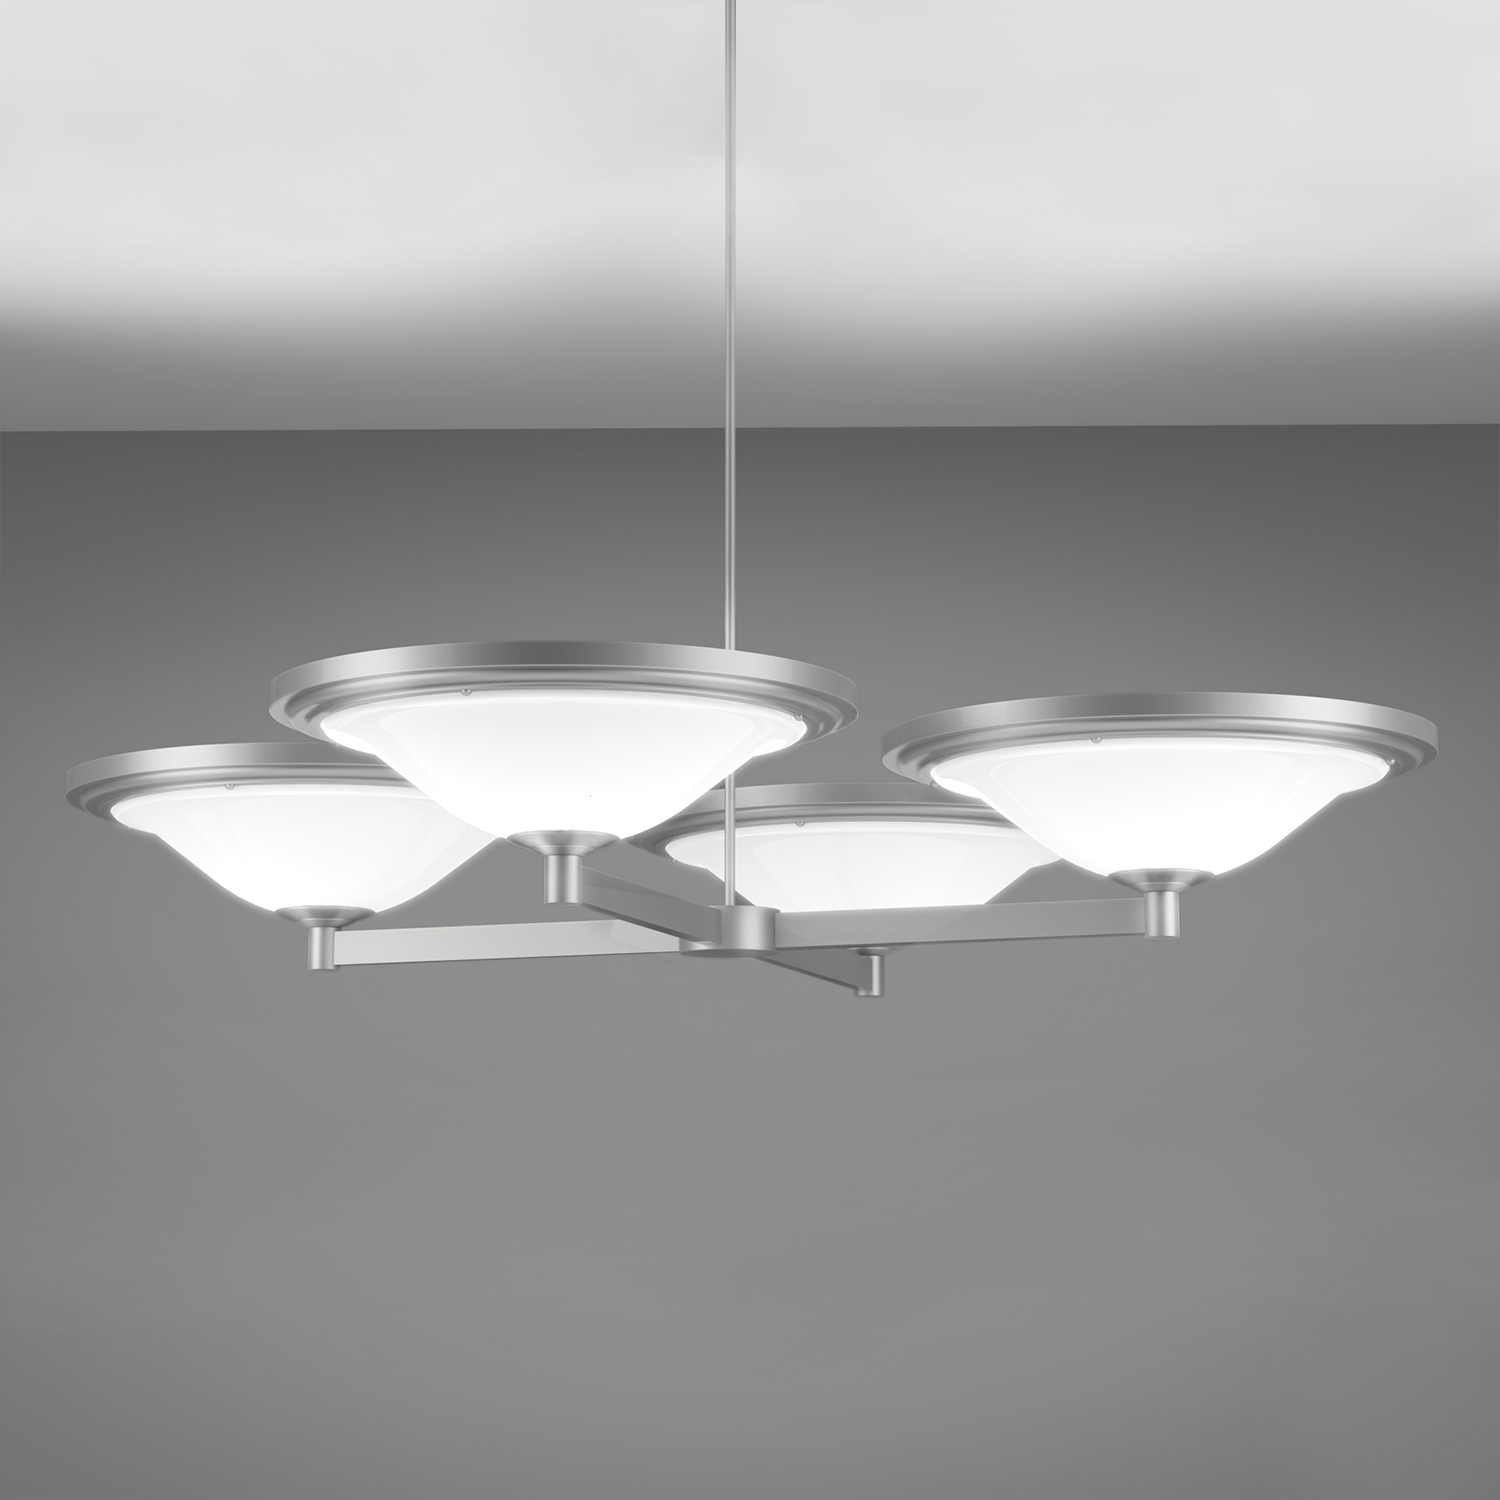 Nuville Chandelier